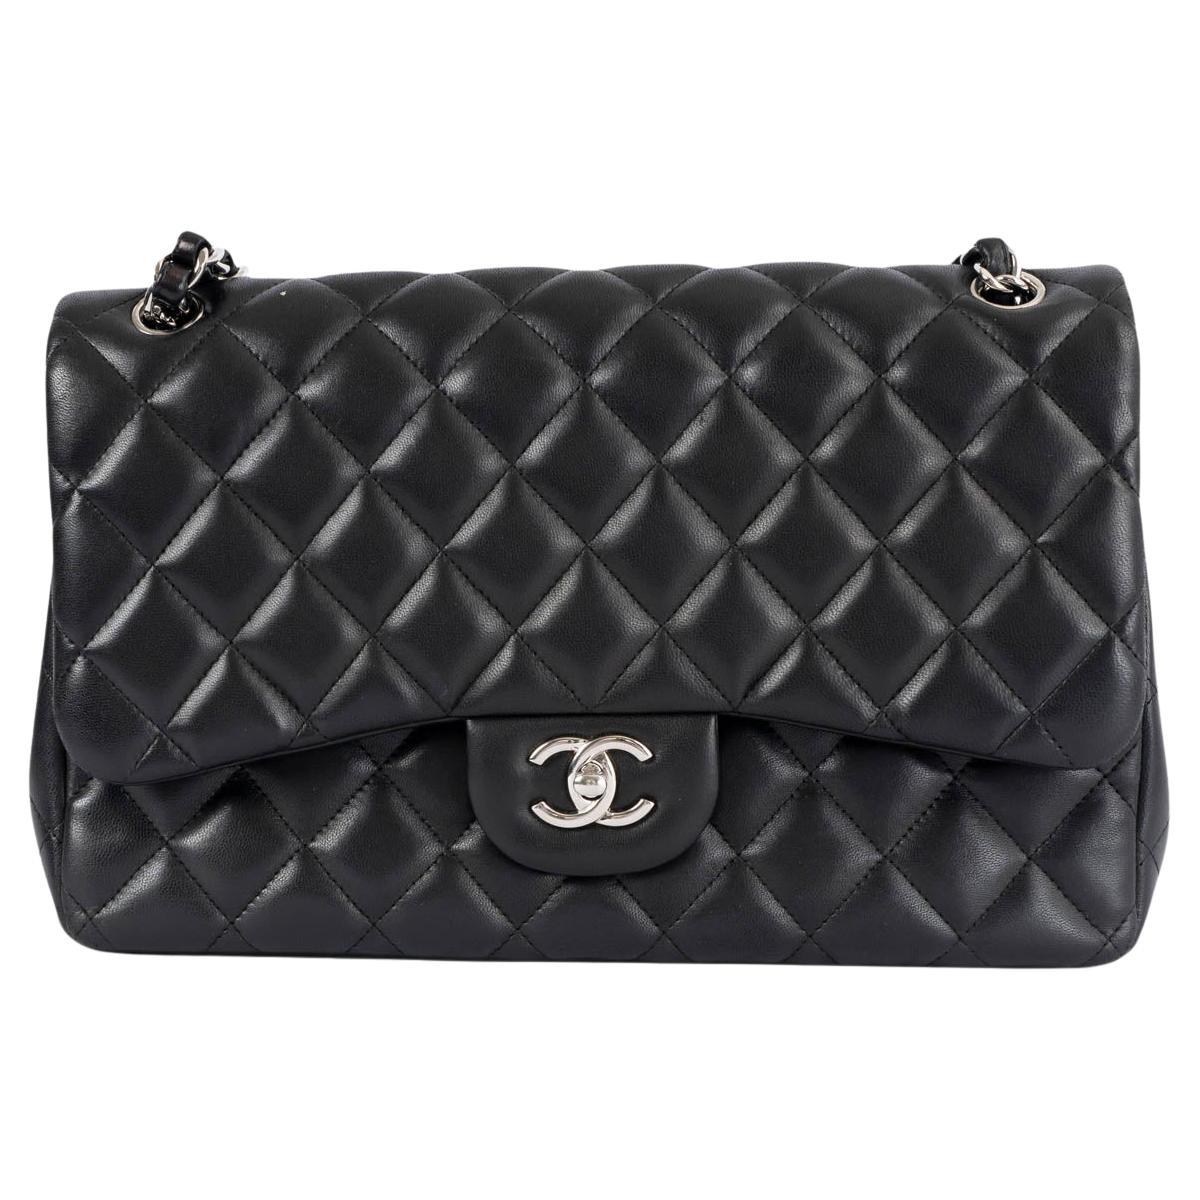 CHANEL black quilted lambskin leather TIMELESS CLASSIC LARGE Flap Shoulder Bag